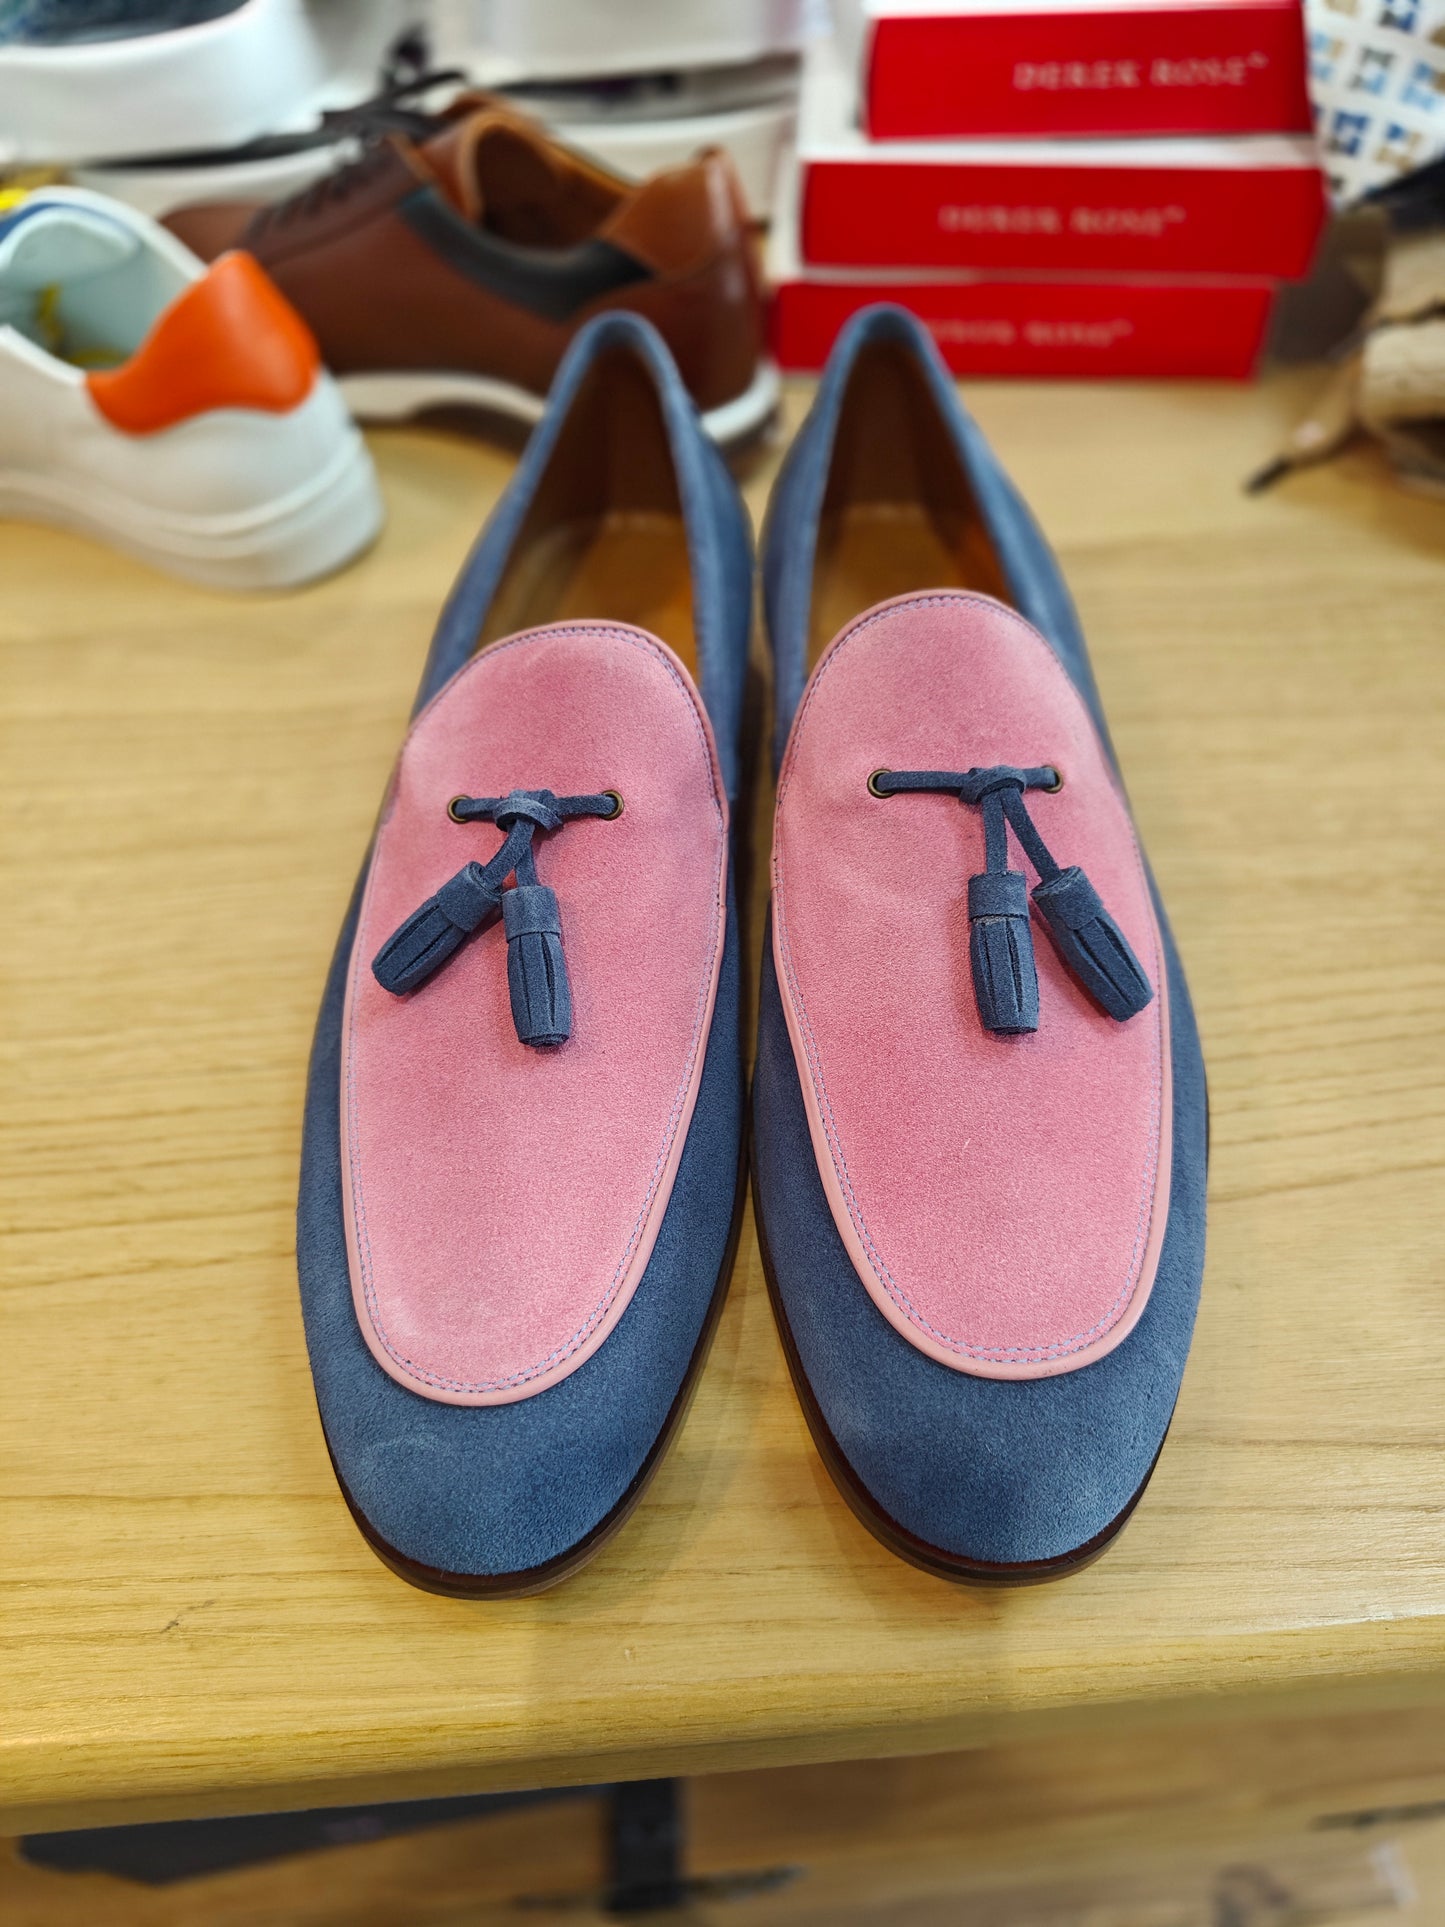 Thornton tassel loafer in Pink and Blue by Lacuzzo